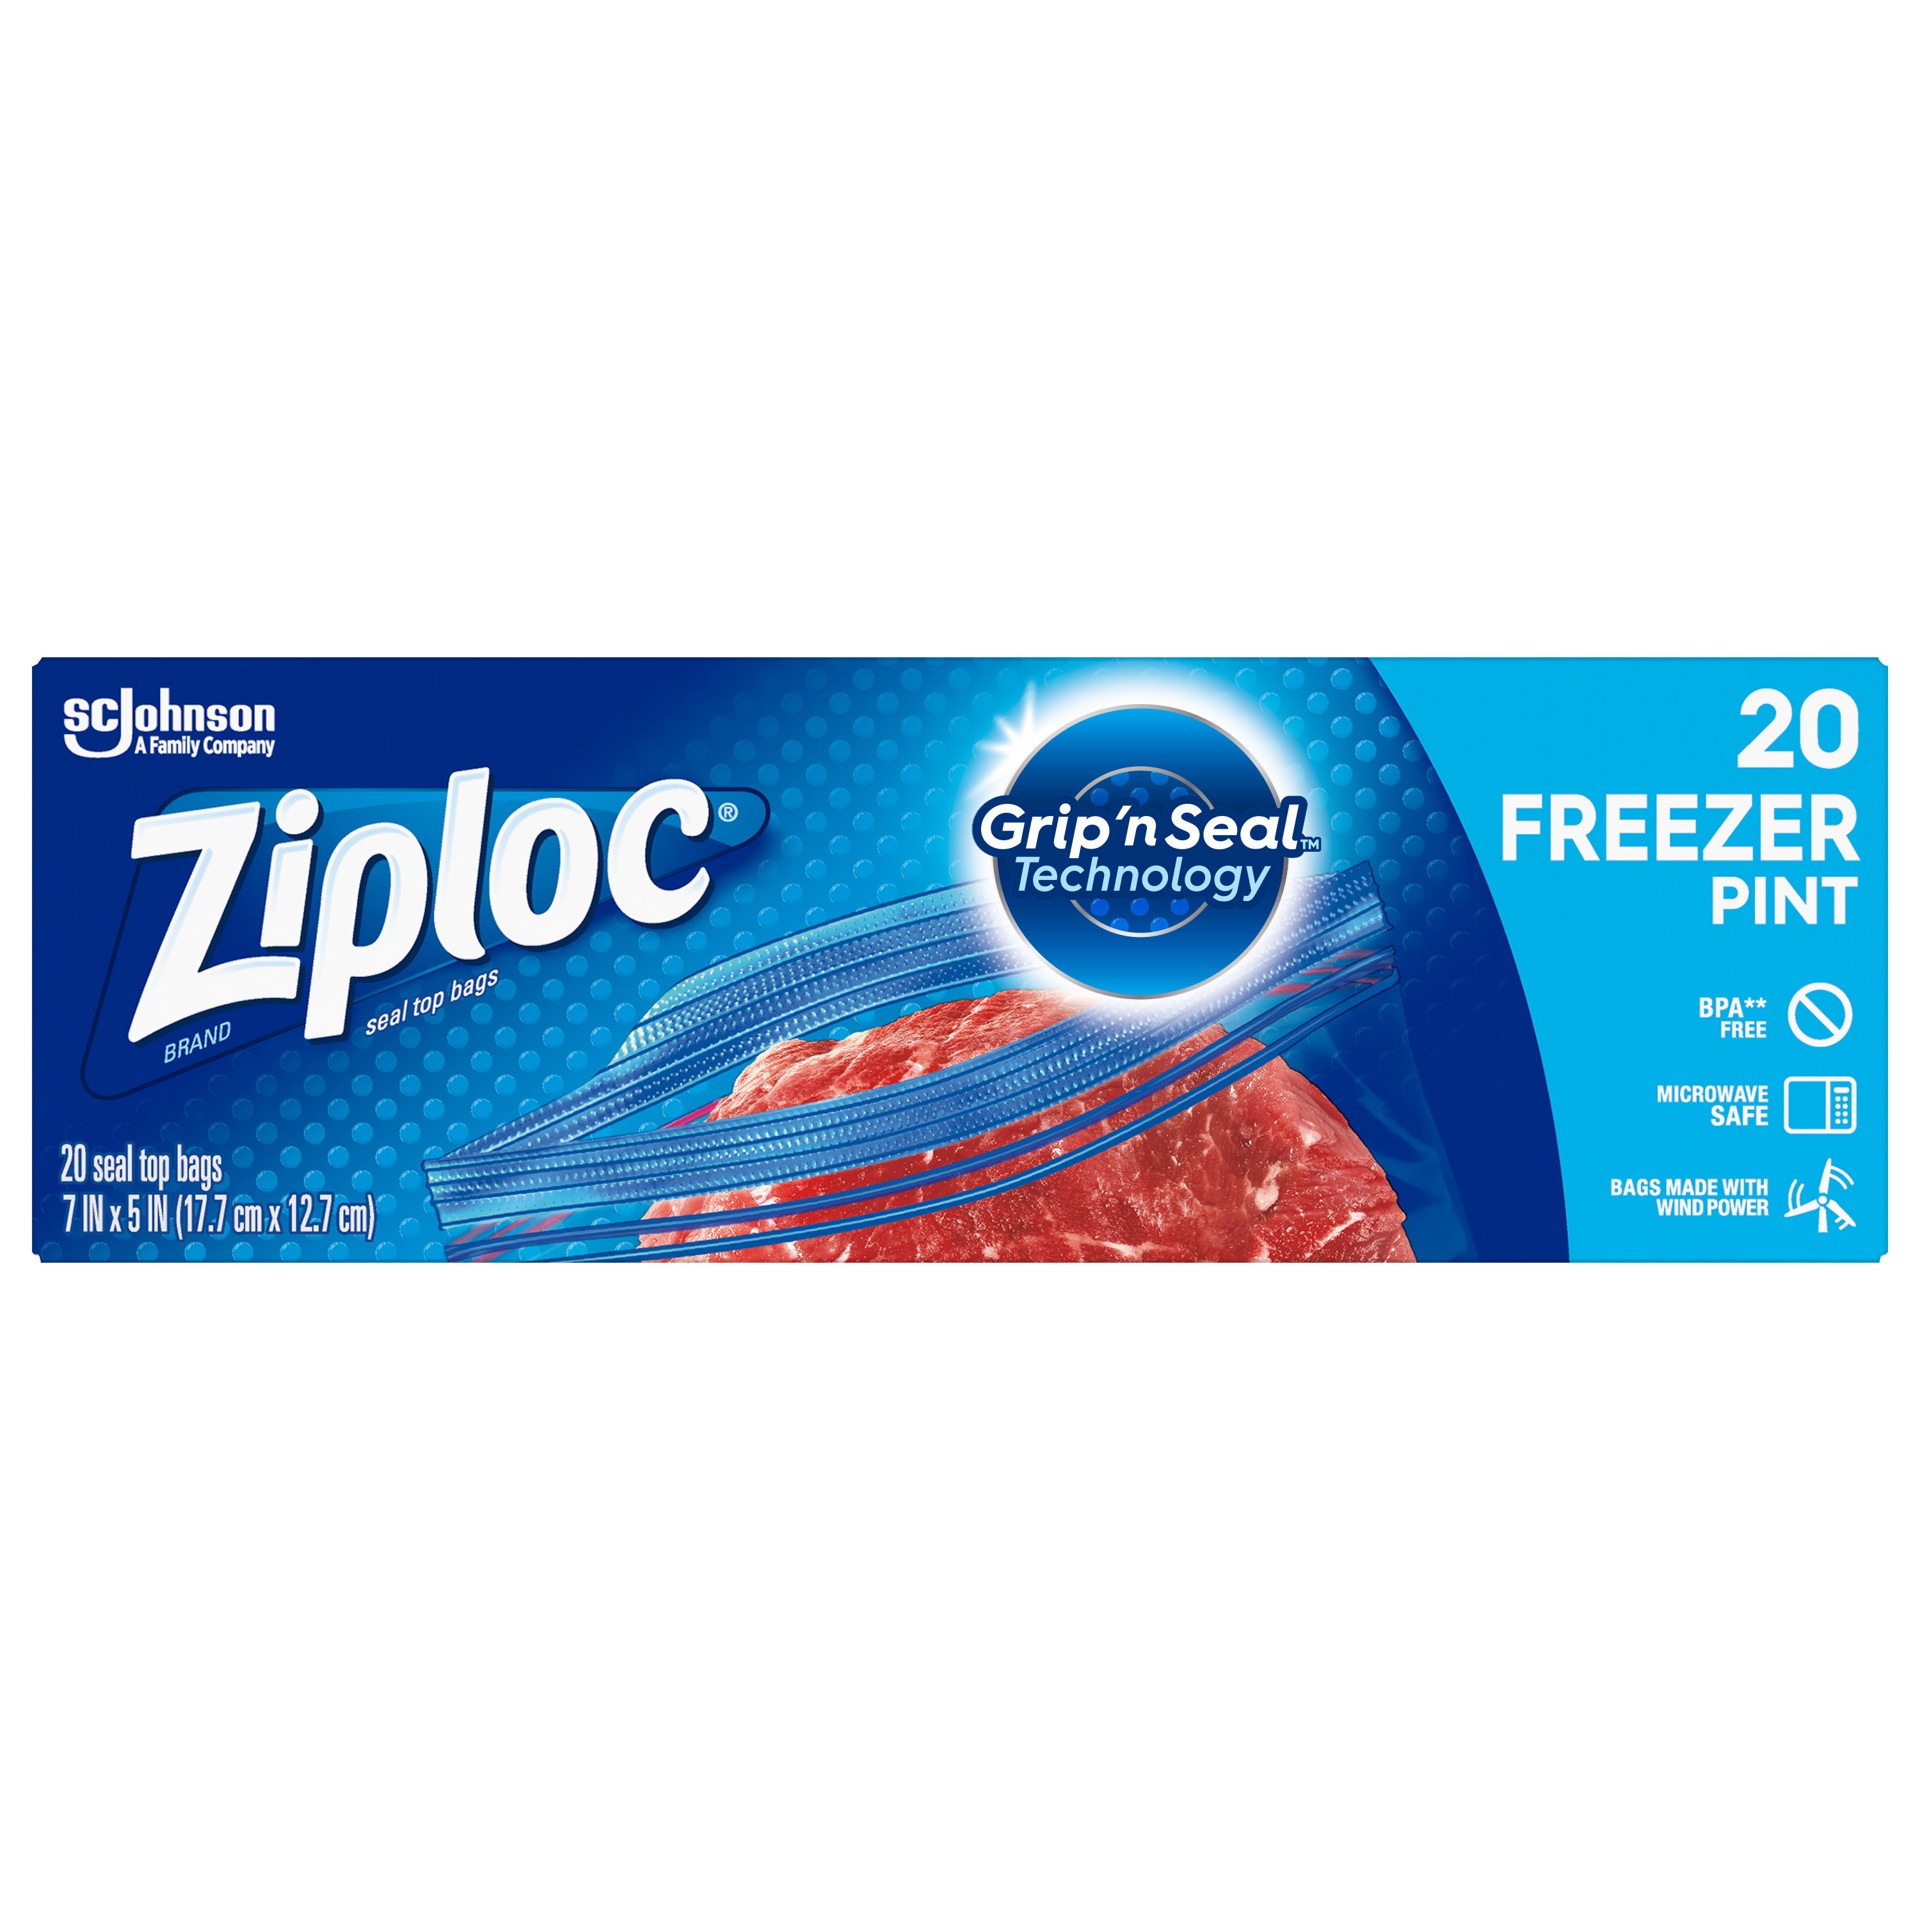 slide 1 of 5, Ziploc Brand Freezer Bags with Grip 'n Seal Technology, Pint, 20 Count, 20 ct